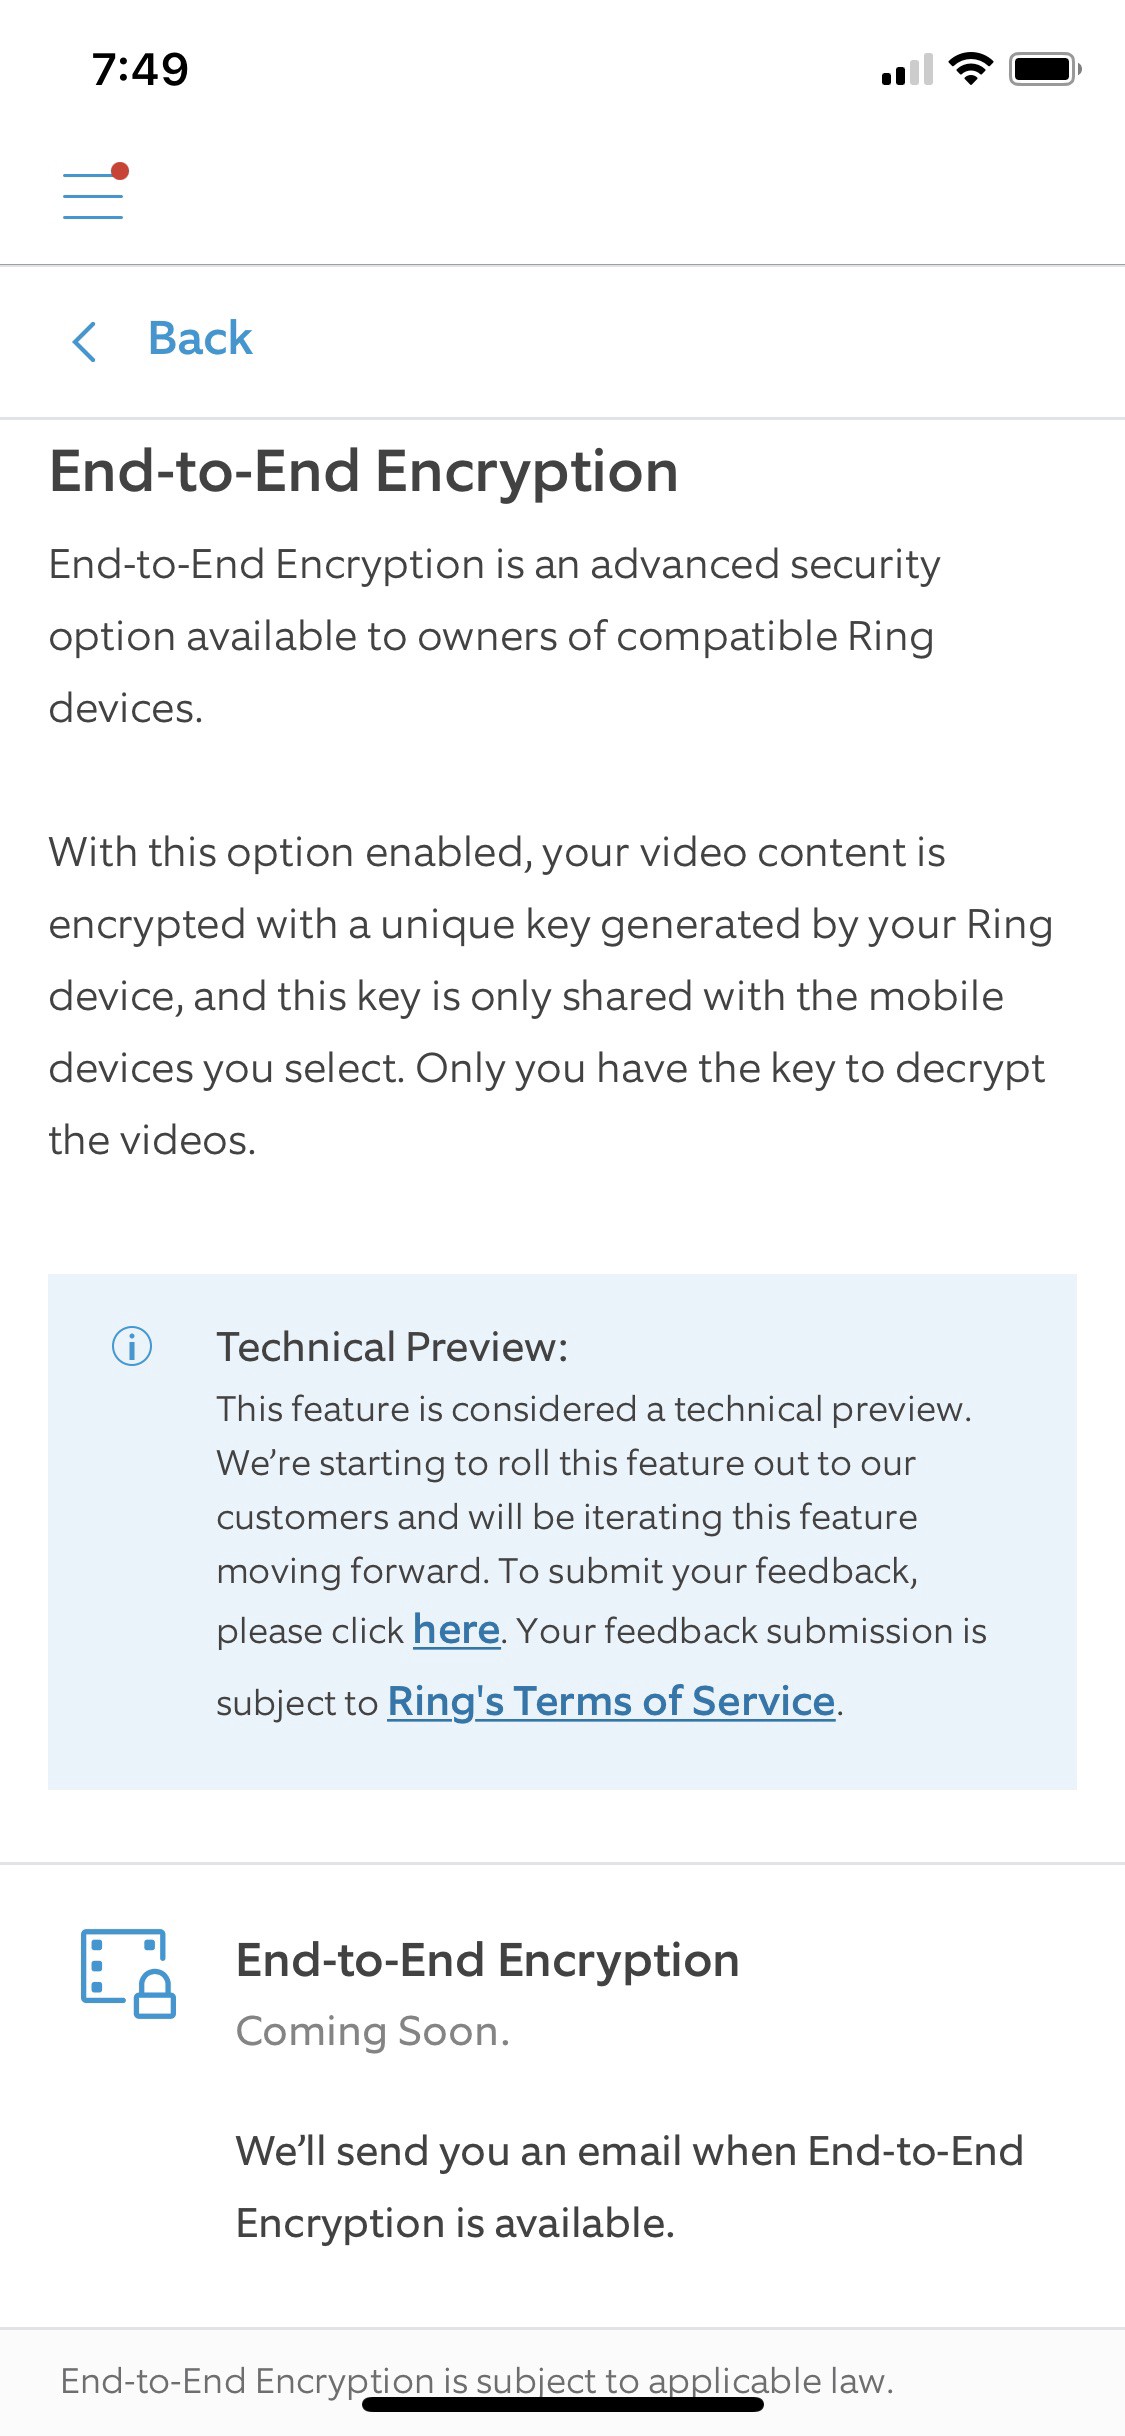 Ring's app on January 25, 2021 — says Technical Preview and Coming Soon.